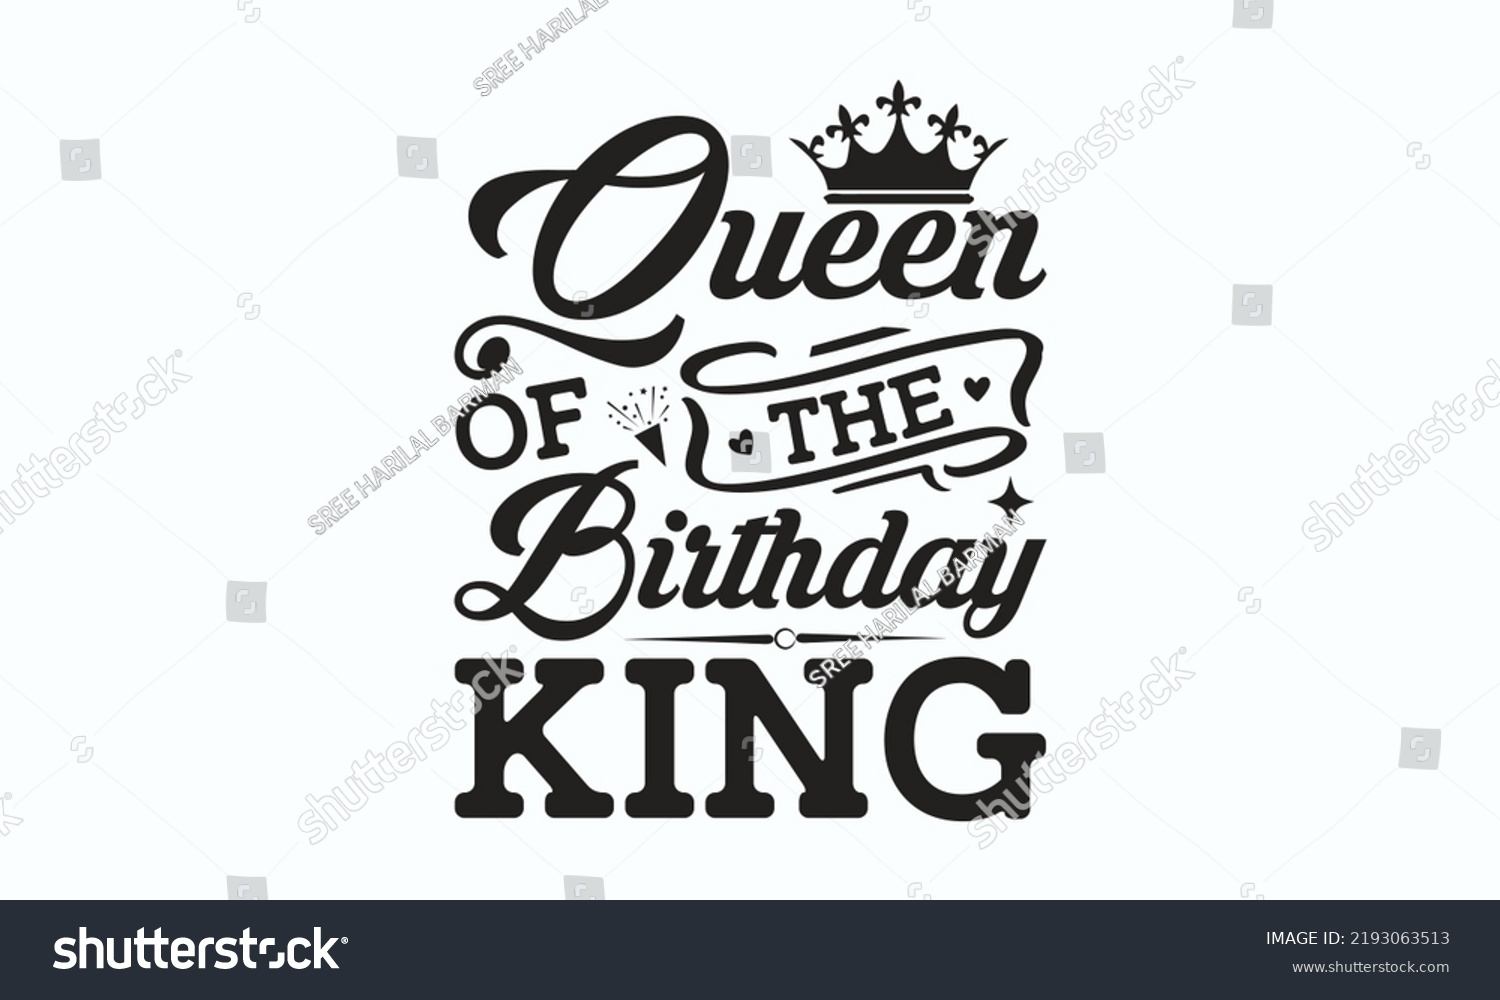 SVG of Queen of the birthday king - Birthday SVG Digest typographic vector design for greeting cards, Birthday cards, Good for scrapbooking, posters, templet, textiles, gifts, and wedding sets, design.  svg